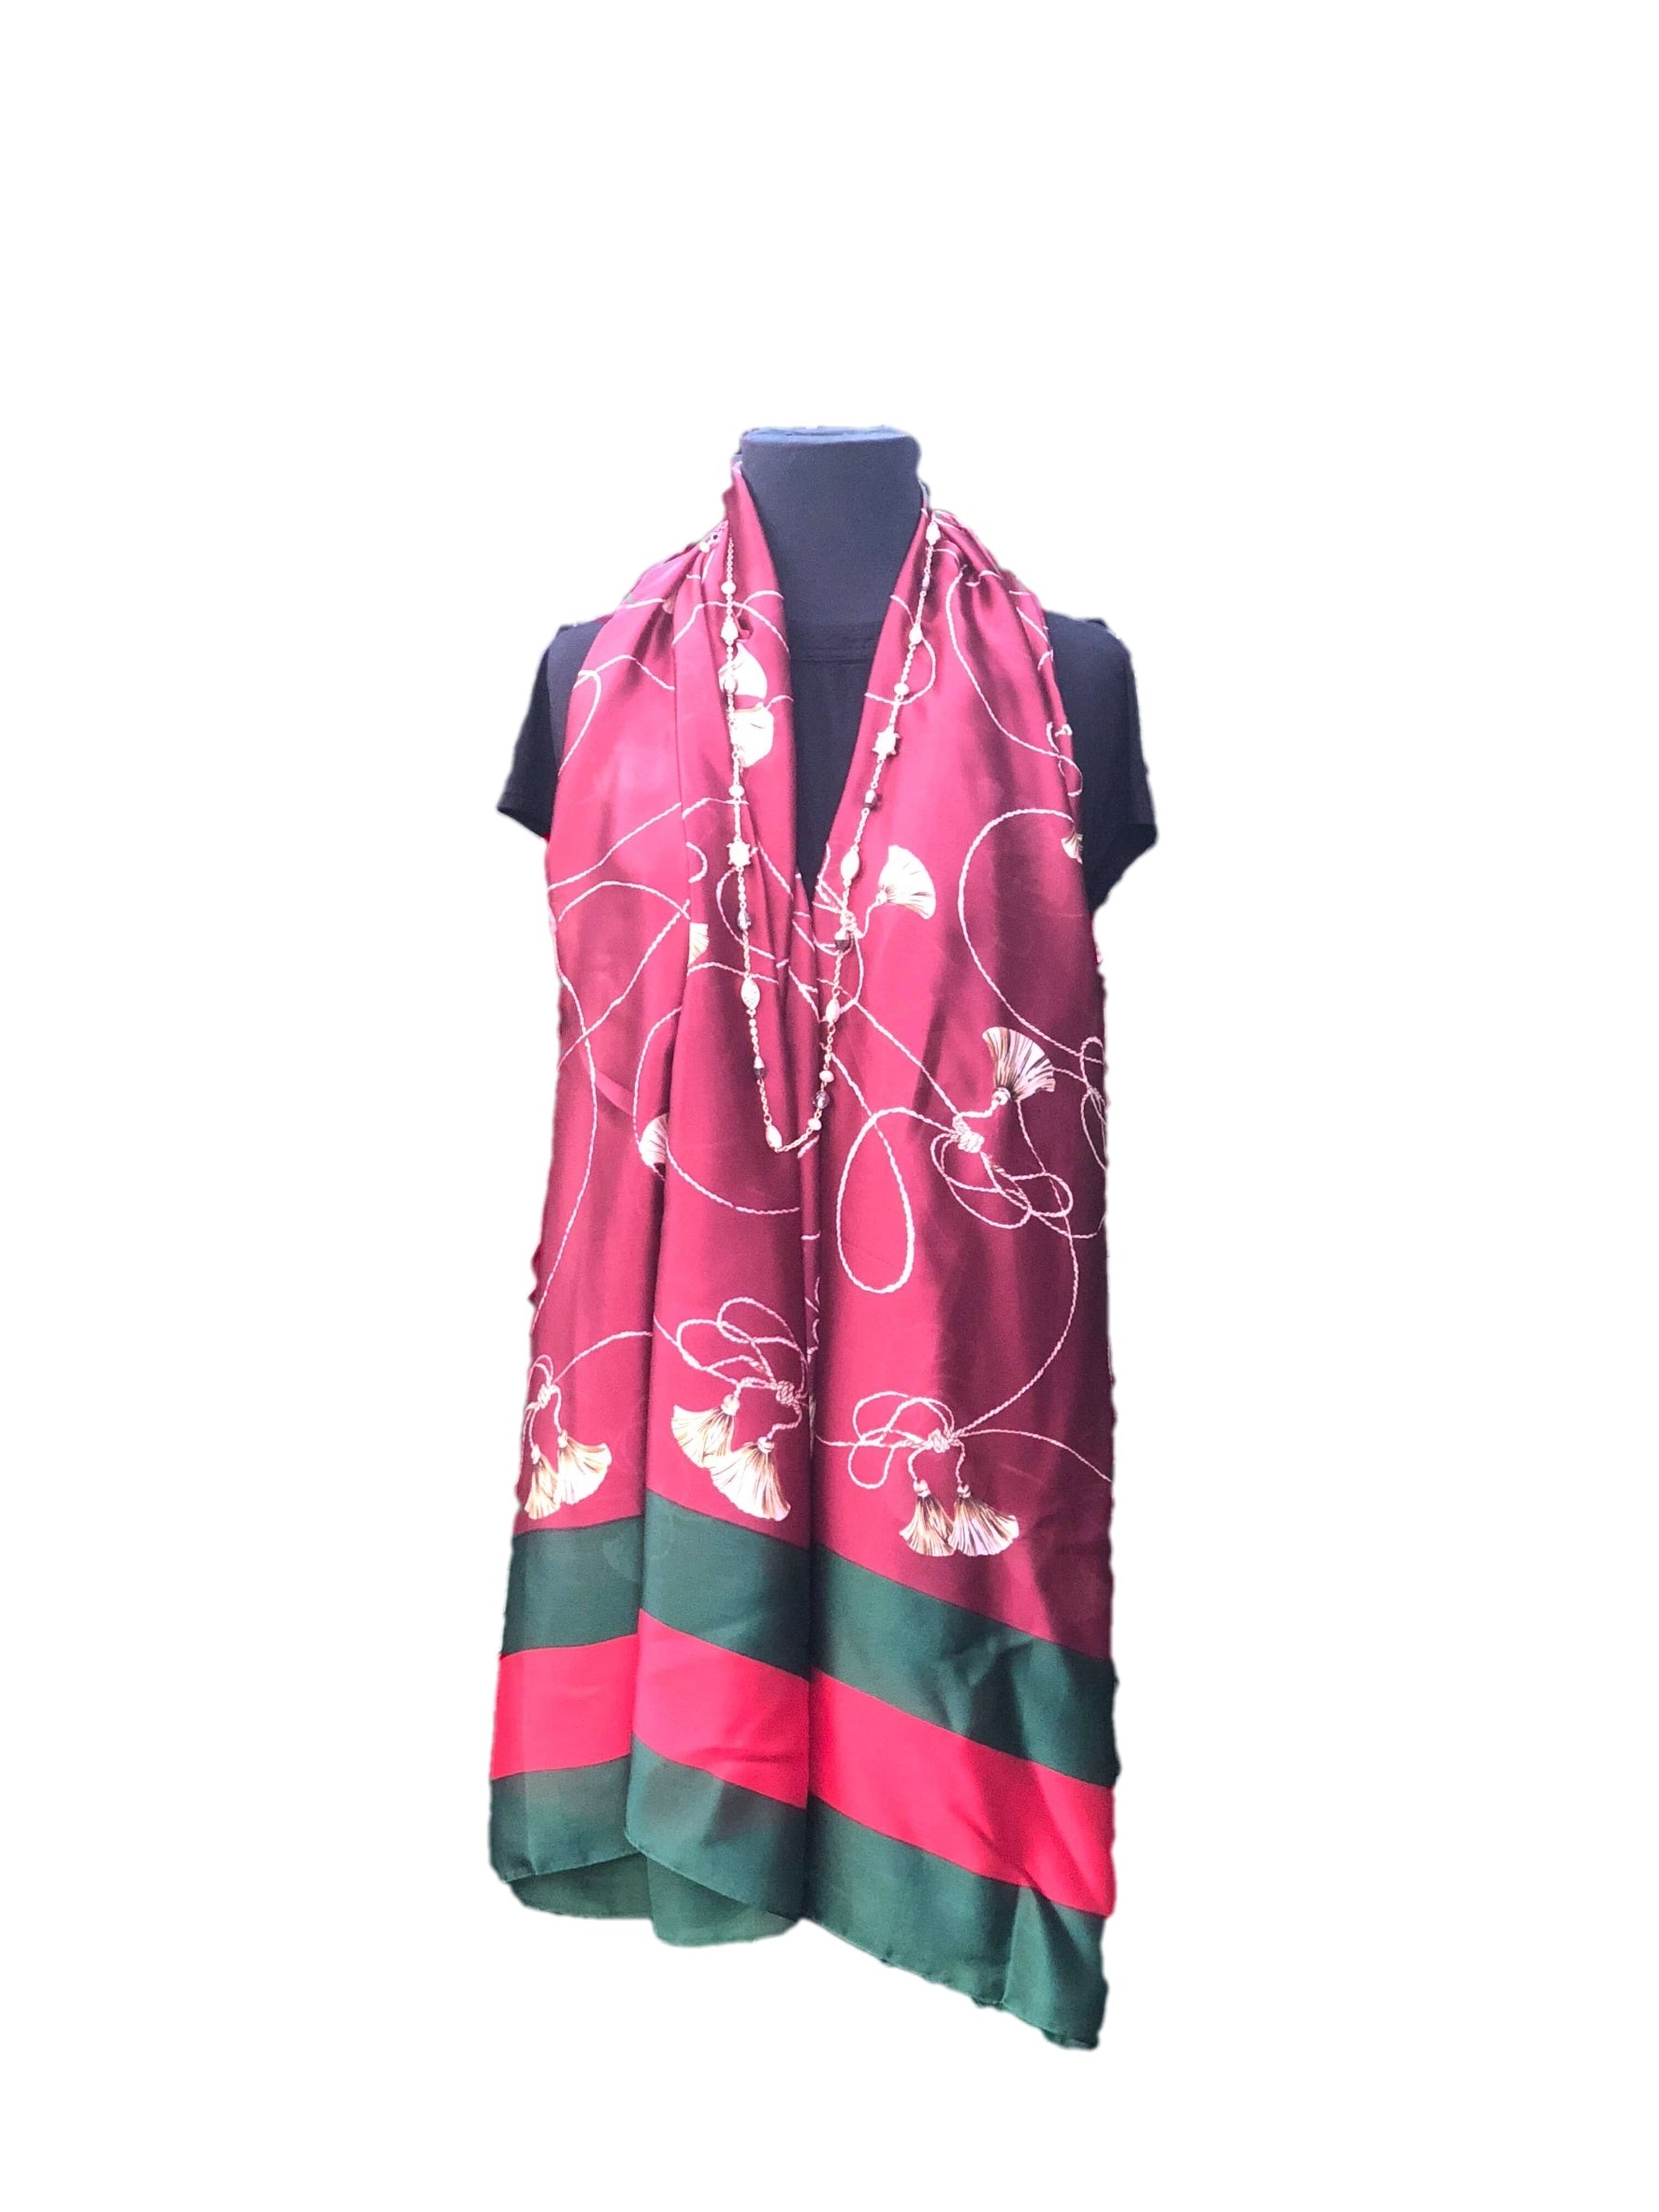 Bright Red/Maroon Patterned Printed Scarf - Global Trendz Fashion®